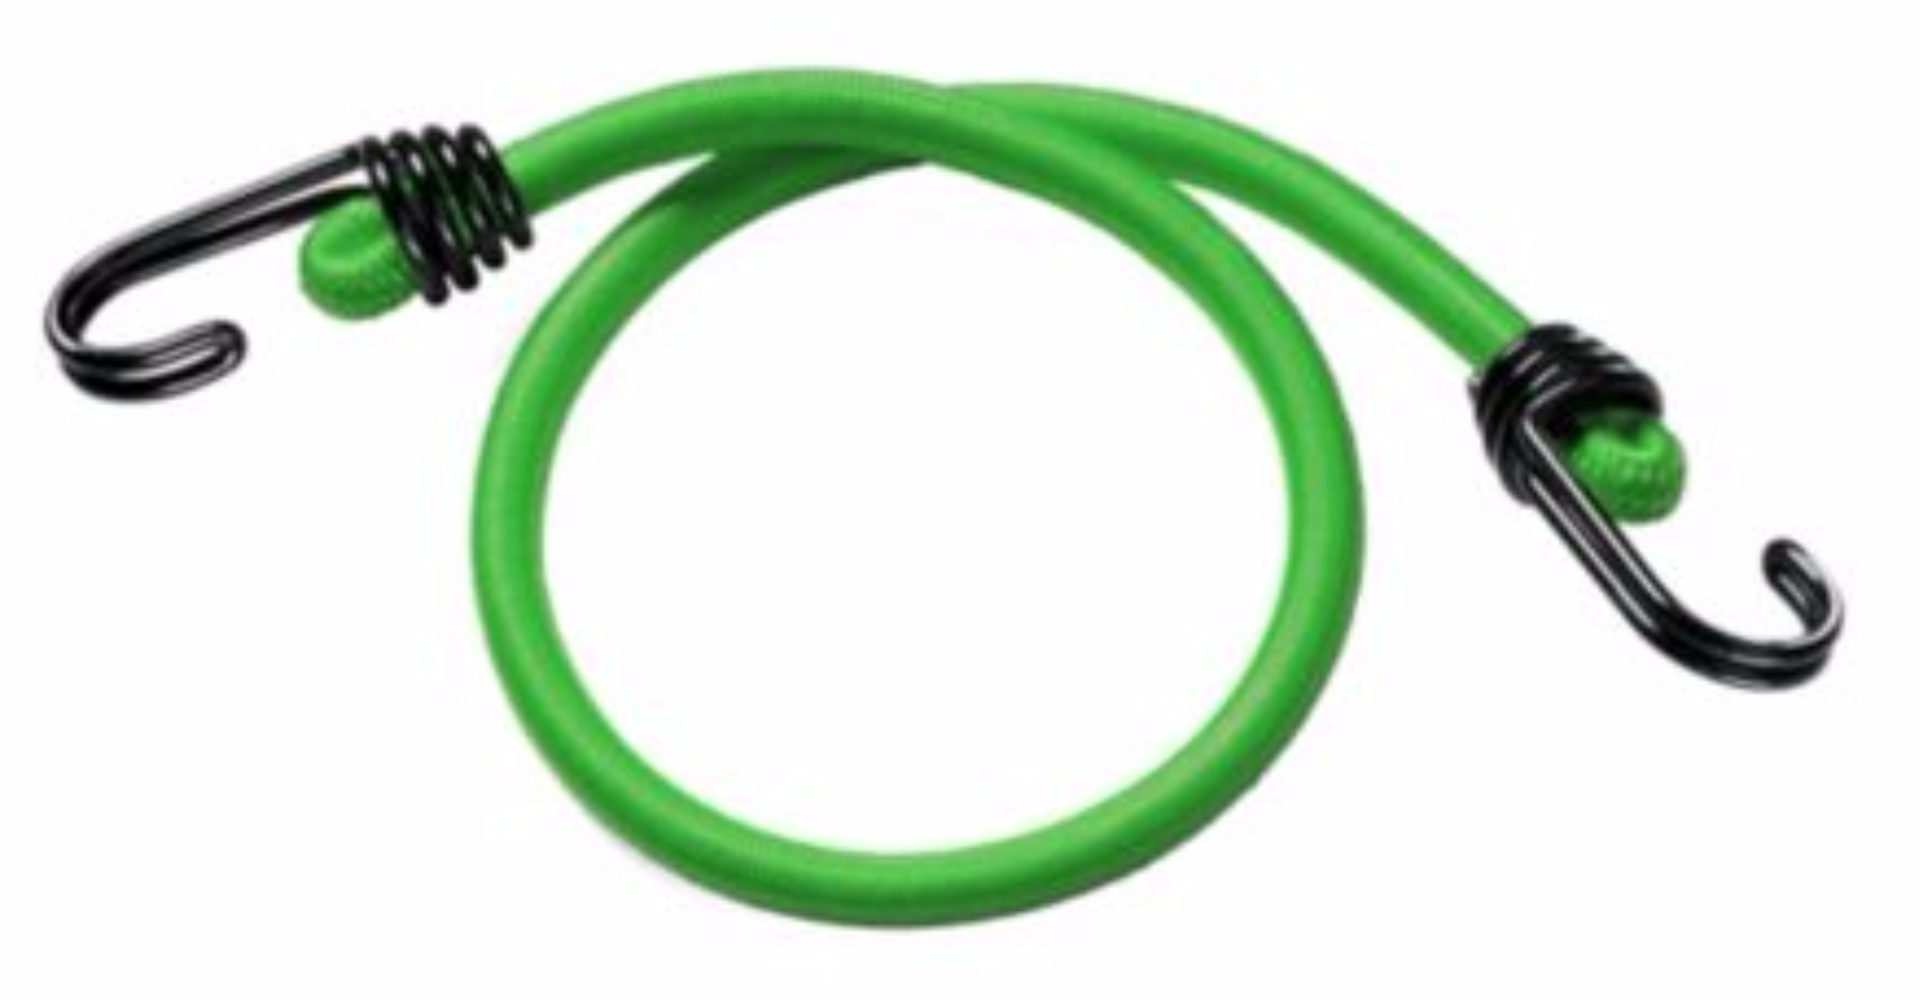 8mm Green Bungee Cord Strap x 120cm With Reverse Hook